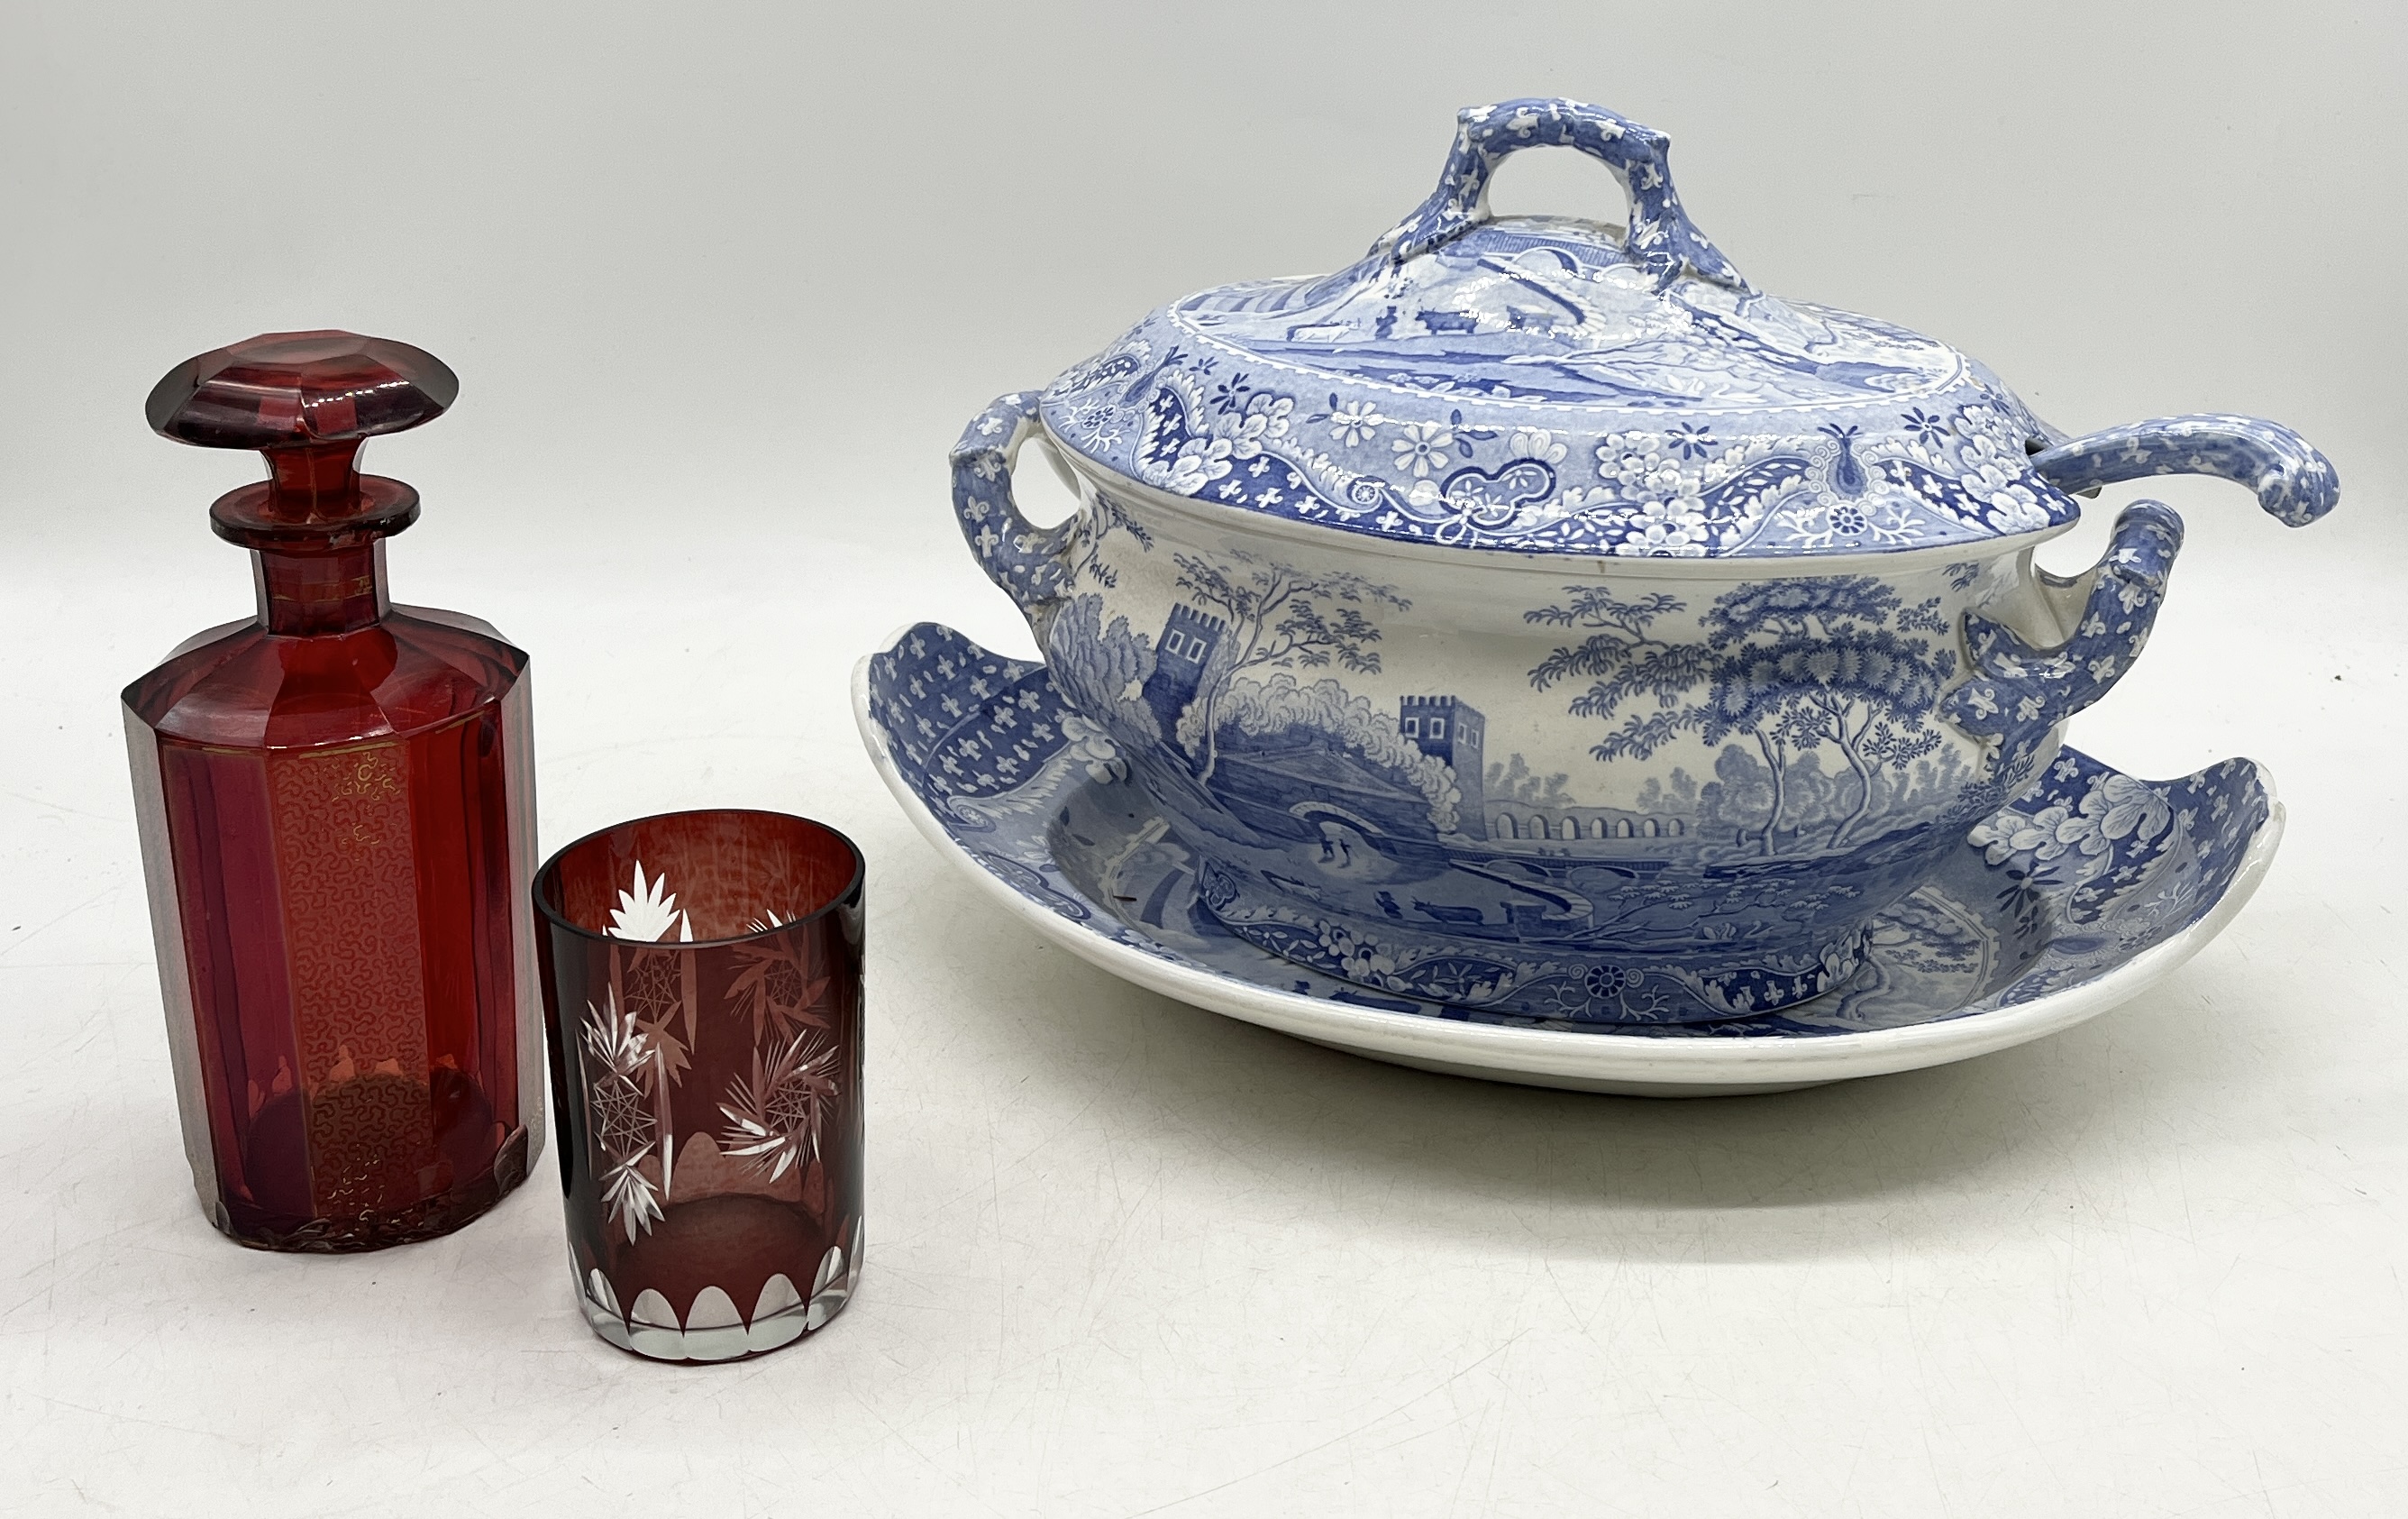 A Spode & Garrett "Old Spode" blue and white lidded tureen with dish and ladle along with a bohemian